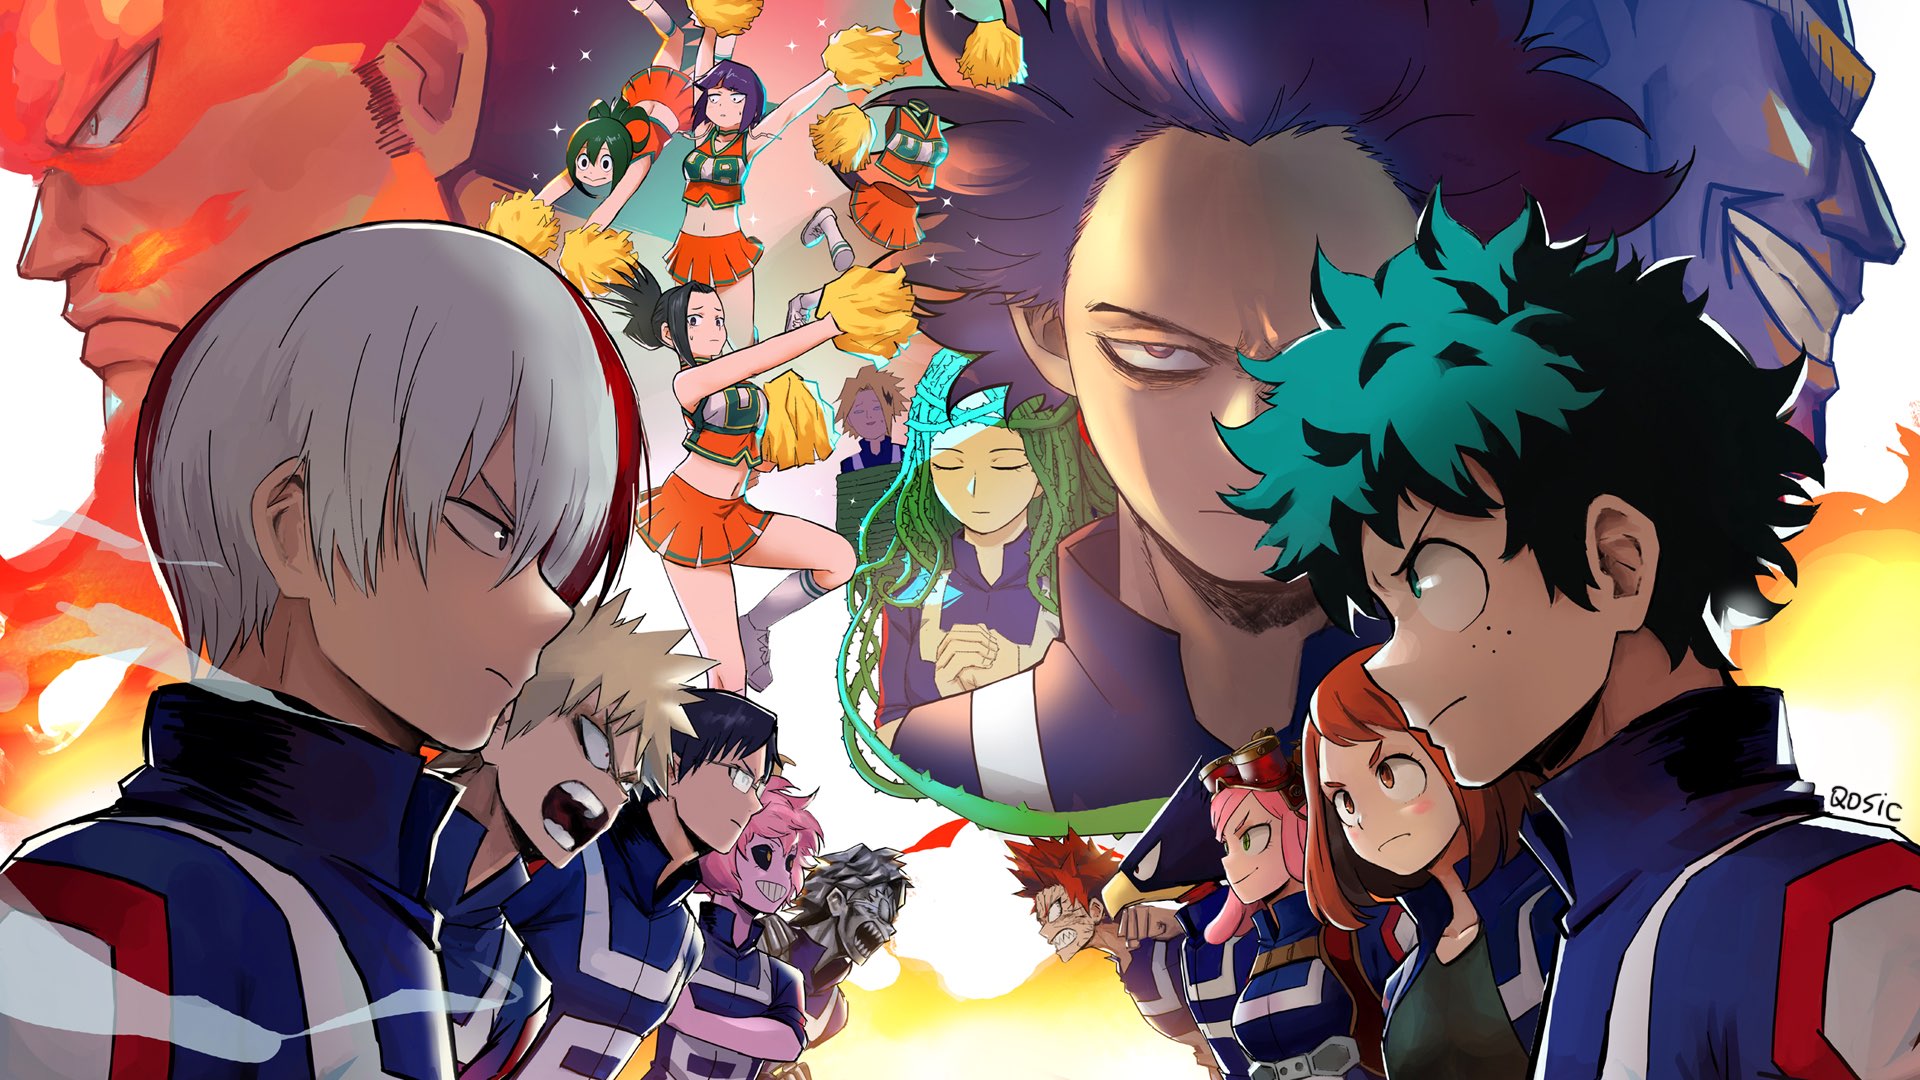 Anime Tournament - ROUND 1🔥🔥 VOTE FOR BETTER ANIME MY HERO ACADEMIA(❤)  SWORD ART ONLINE(😮) VOTING ENDS IN 24 HOURS. Previous Winner: Dragon Ball  Z